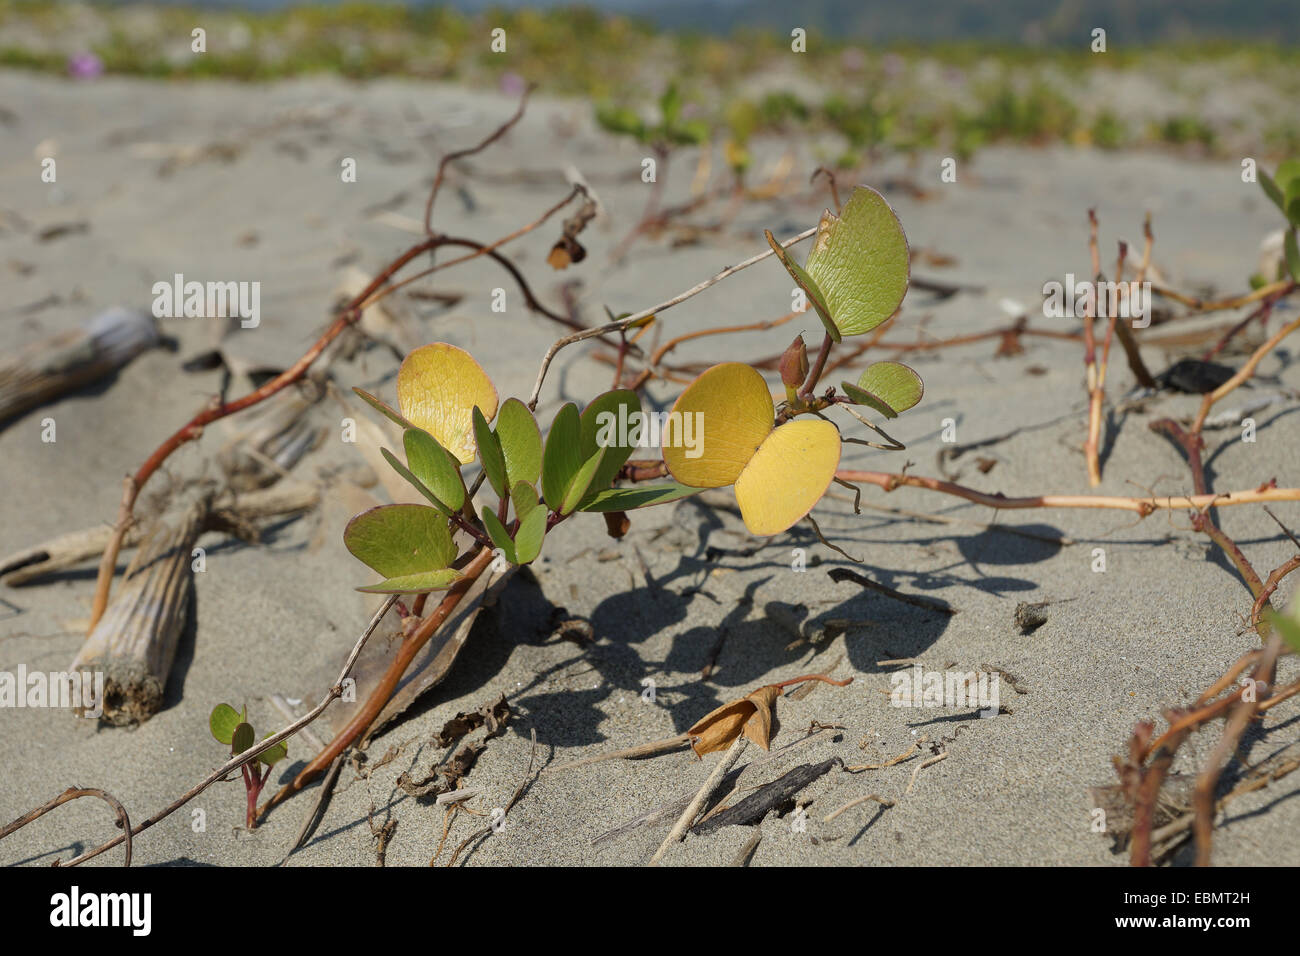 plants growing in the sand, cox's bazar, bangladesh Stock Photo